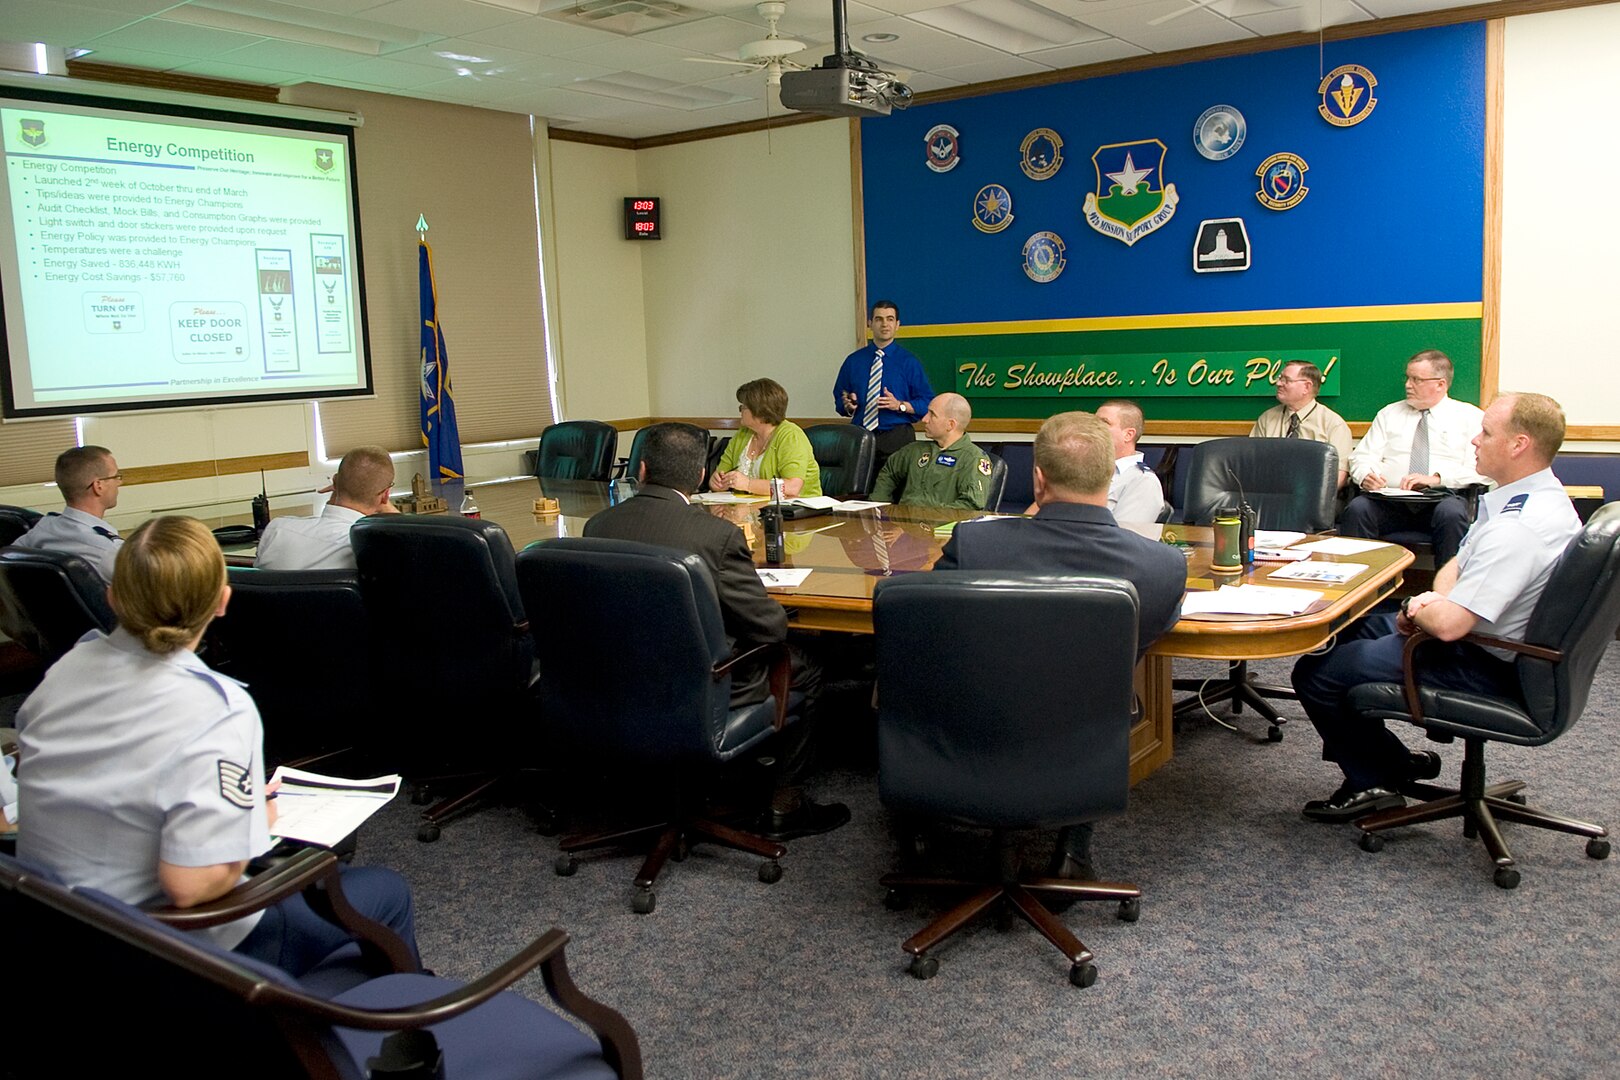 Col. Scott Peel, 902nd Mission Support Group commander, discusses current and projected energy conservation methods to reduce overall energy consumption May 7 at an energy conservation meeting at Joint Base San Antonio-Randolph, Texas. (U.S. Air Force photo by Benjamin Faske)